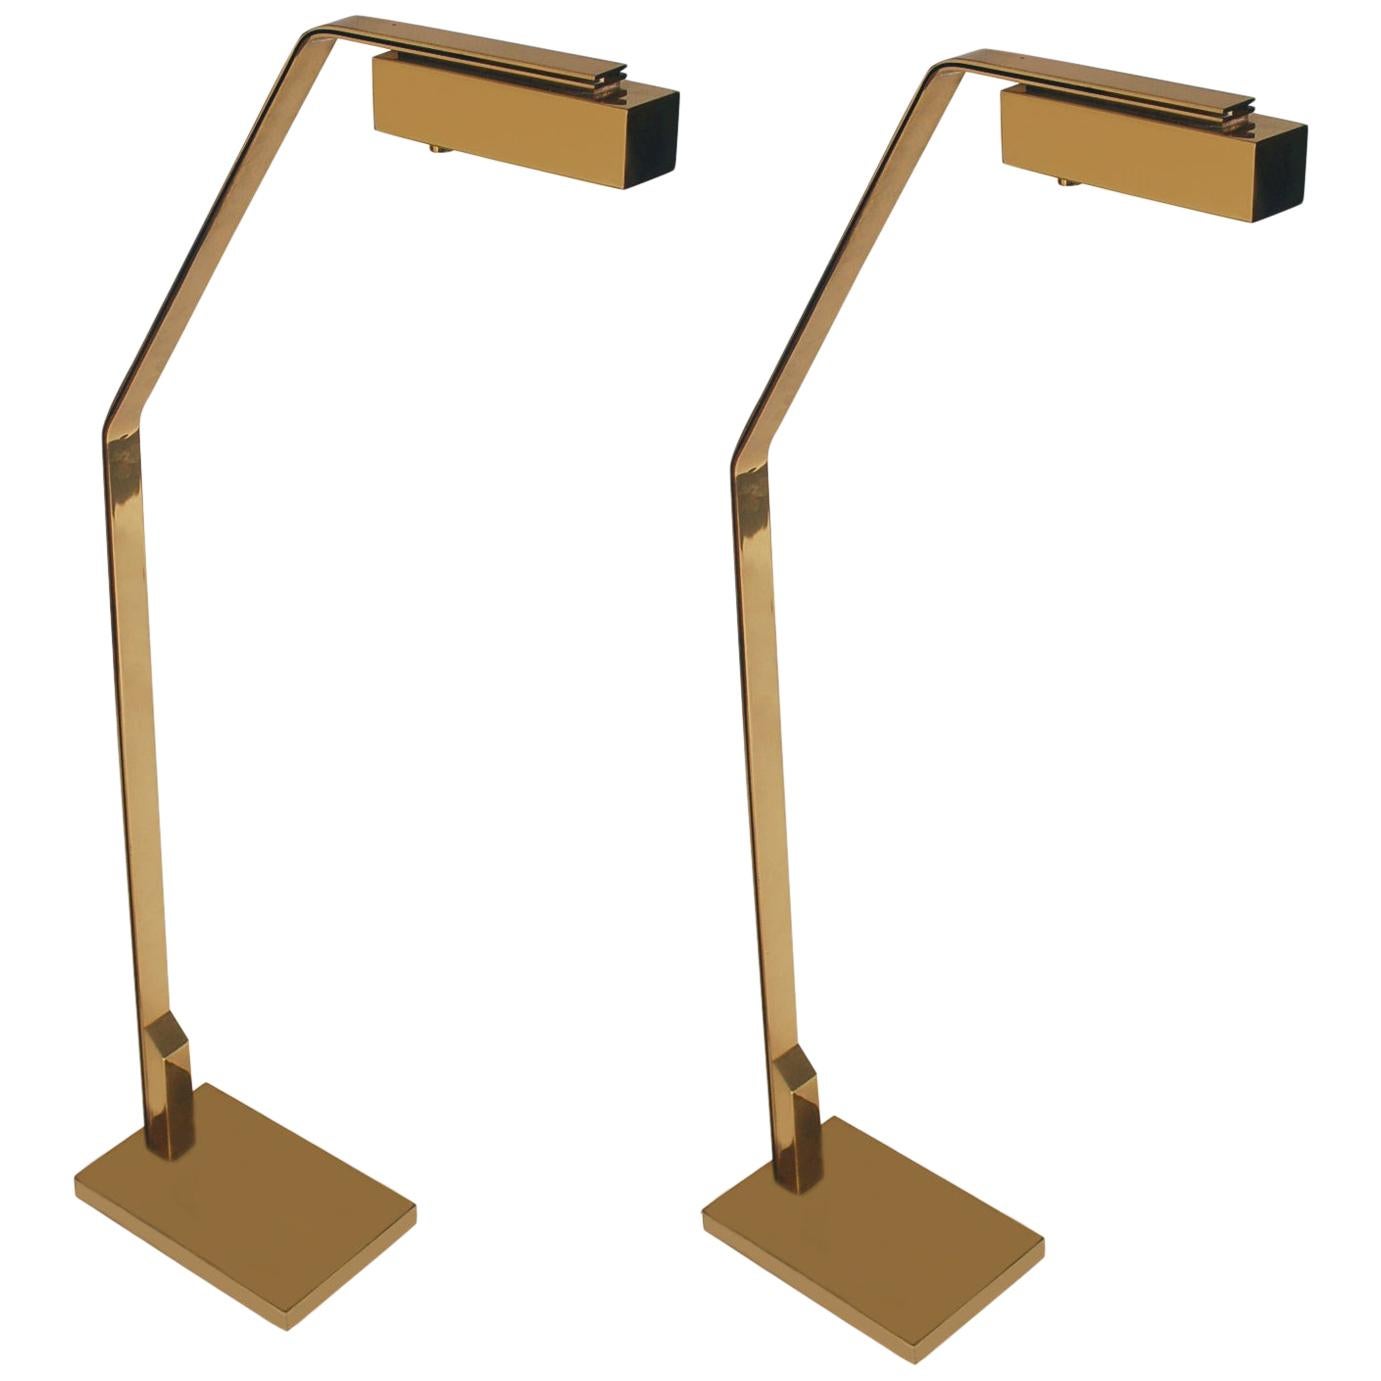 Pair of Midcentury Italian Modern Polished Brass Reading Floor Lamps by Casella